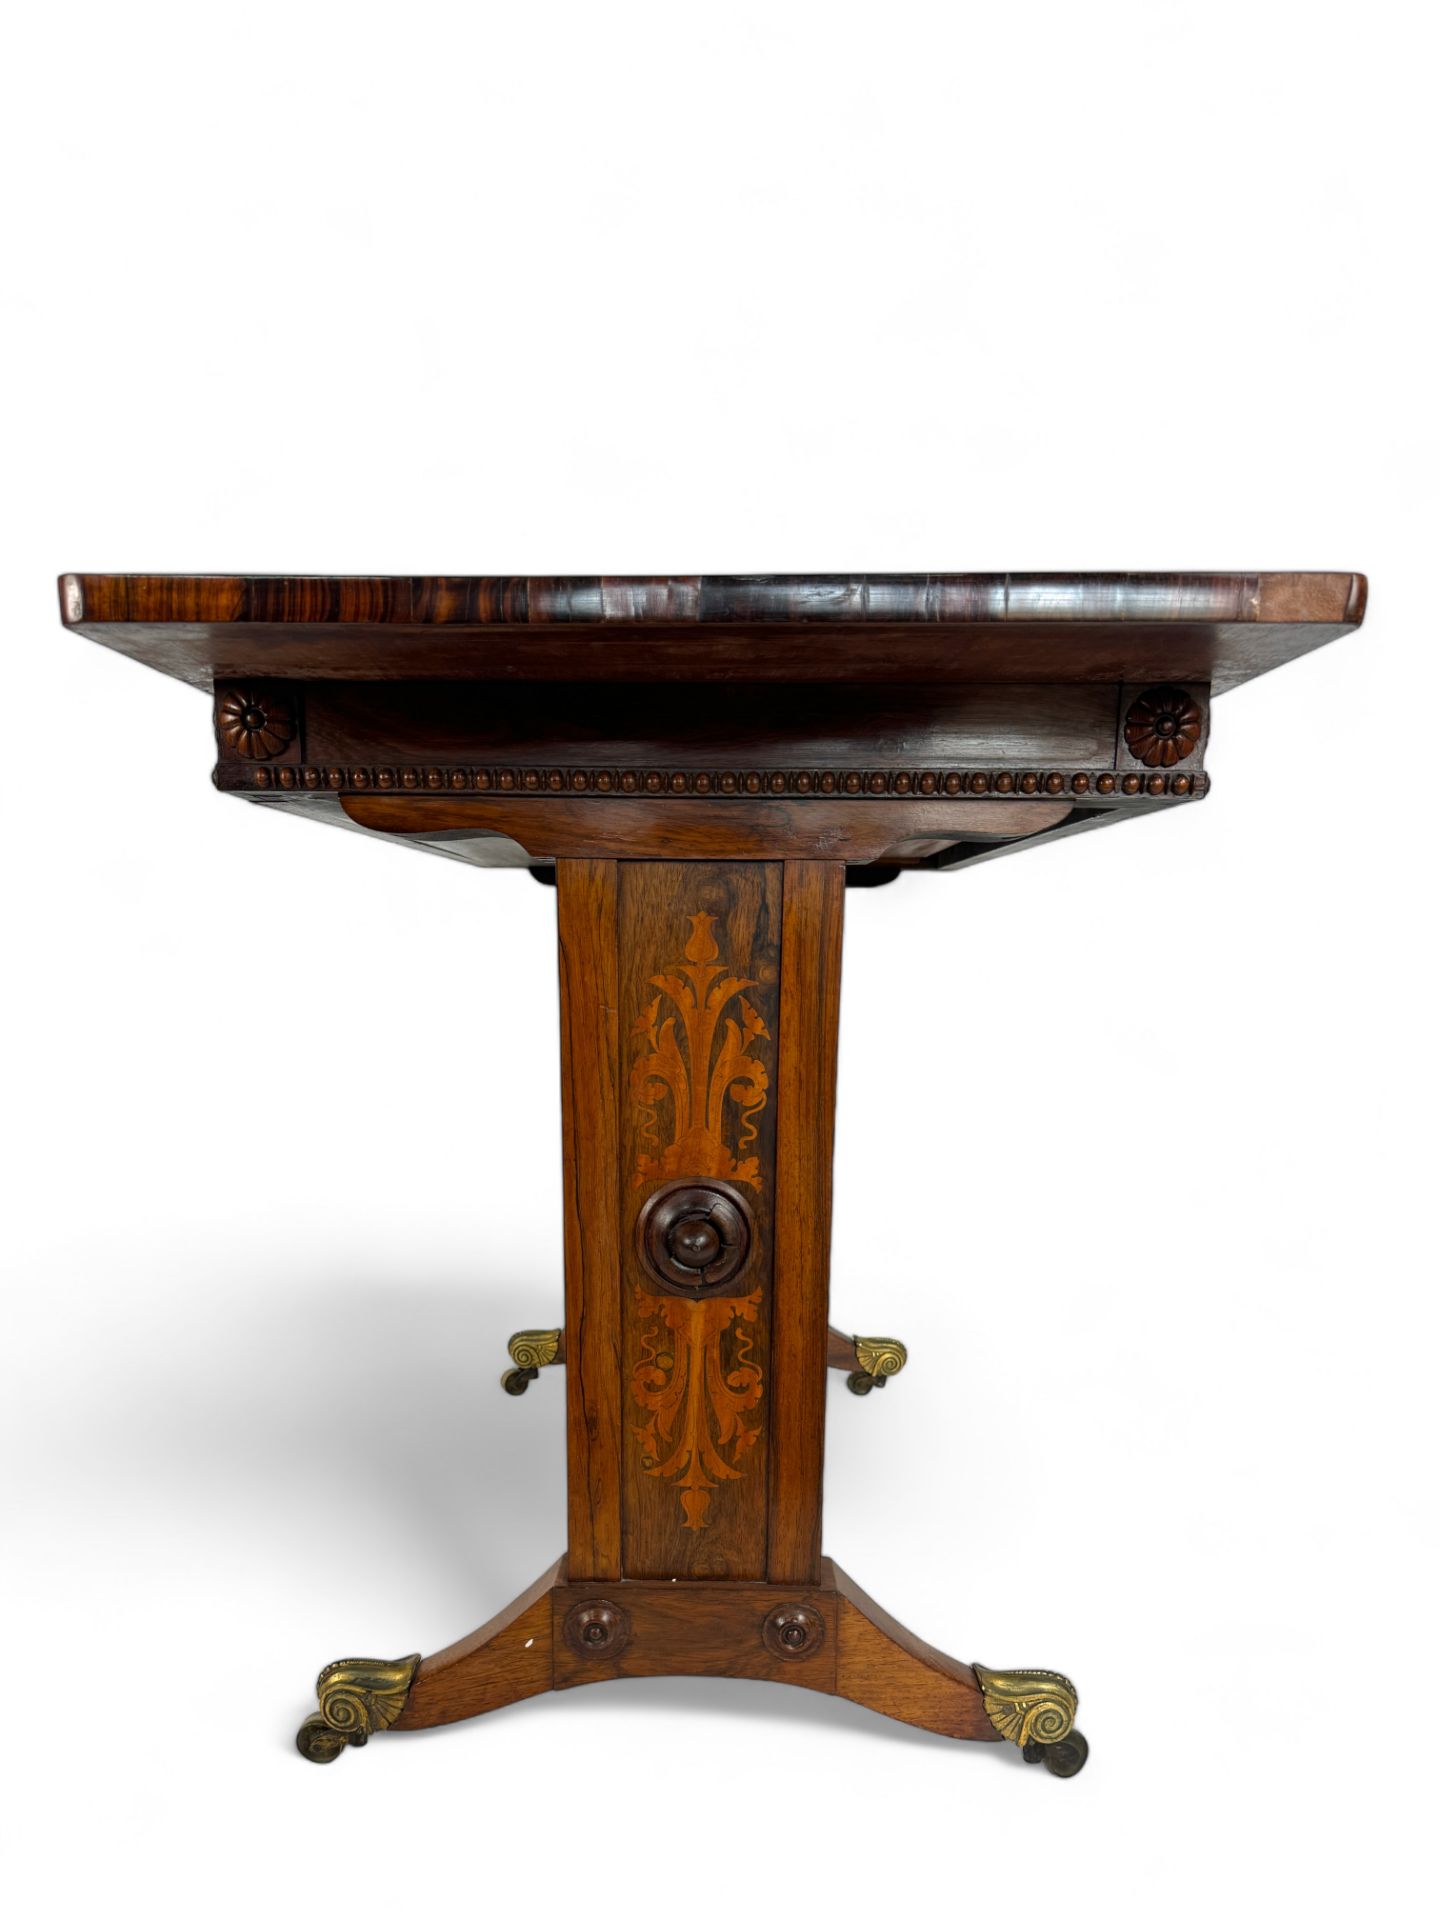 A Regency gonçalo alves and sycamore marquetry library table - Image 6 of 6